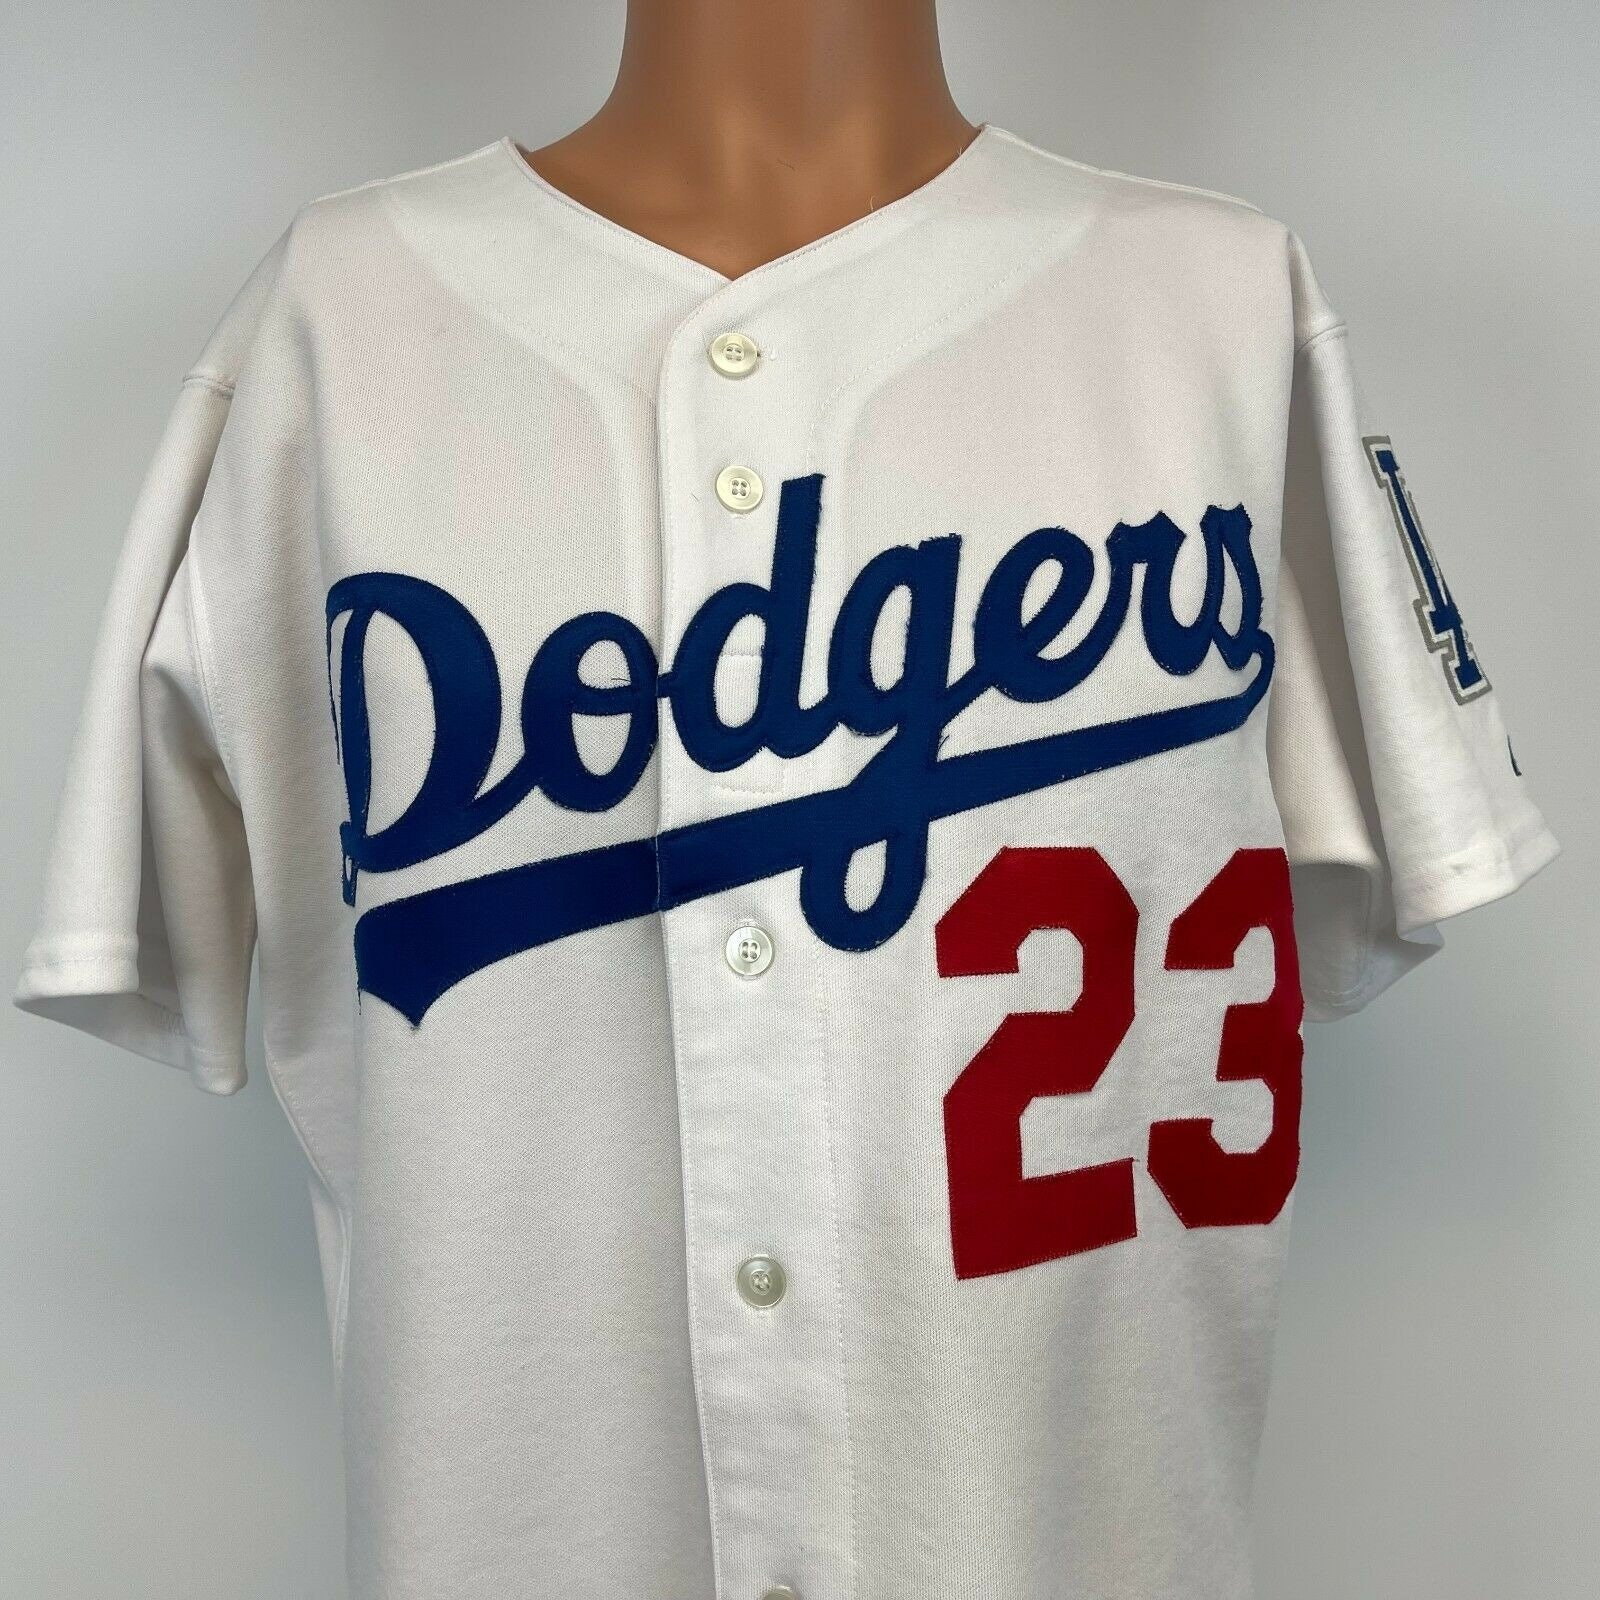 style dodgers jersey